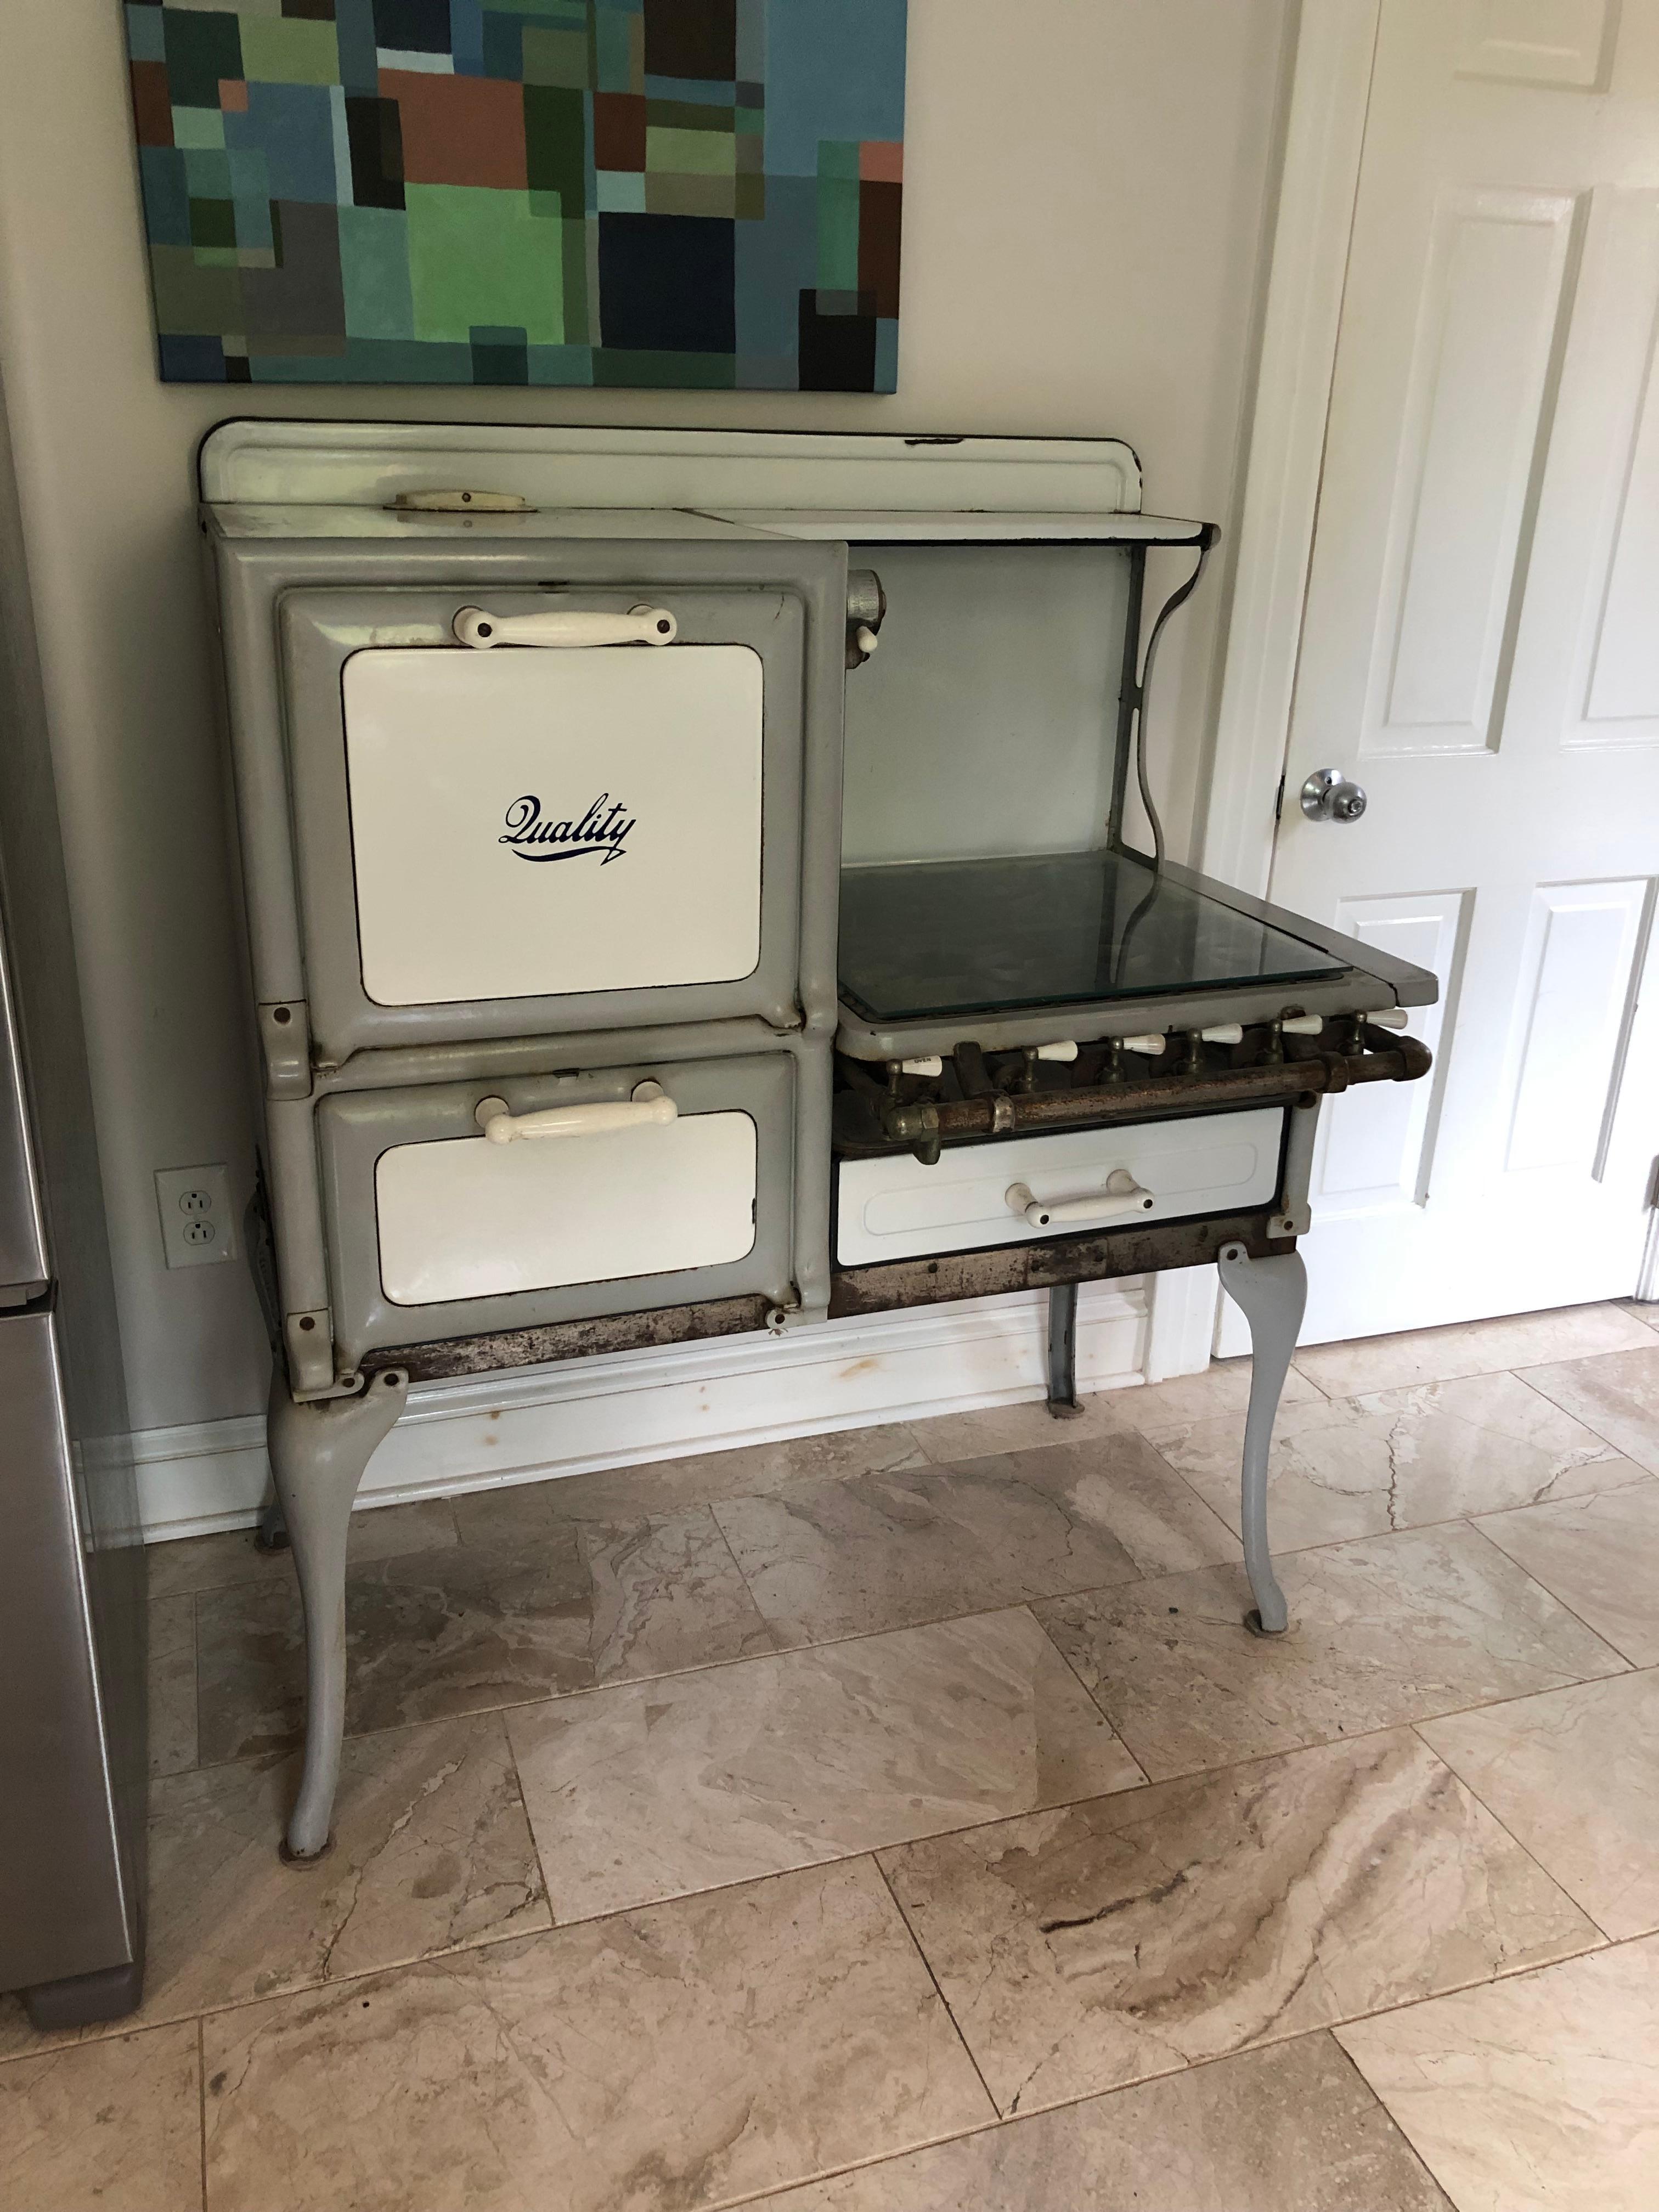 Charming old fashioned light grey, white, black and silver kitchen stove having the name 